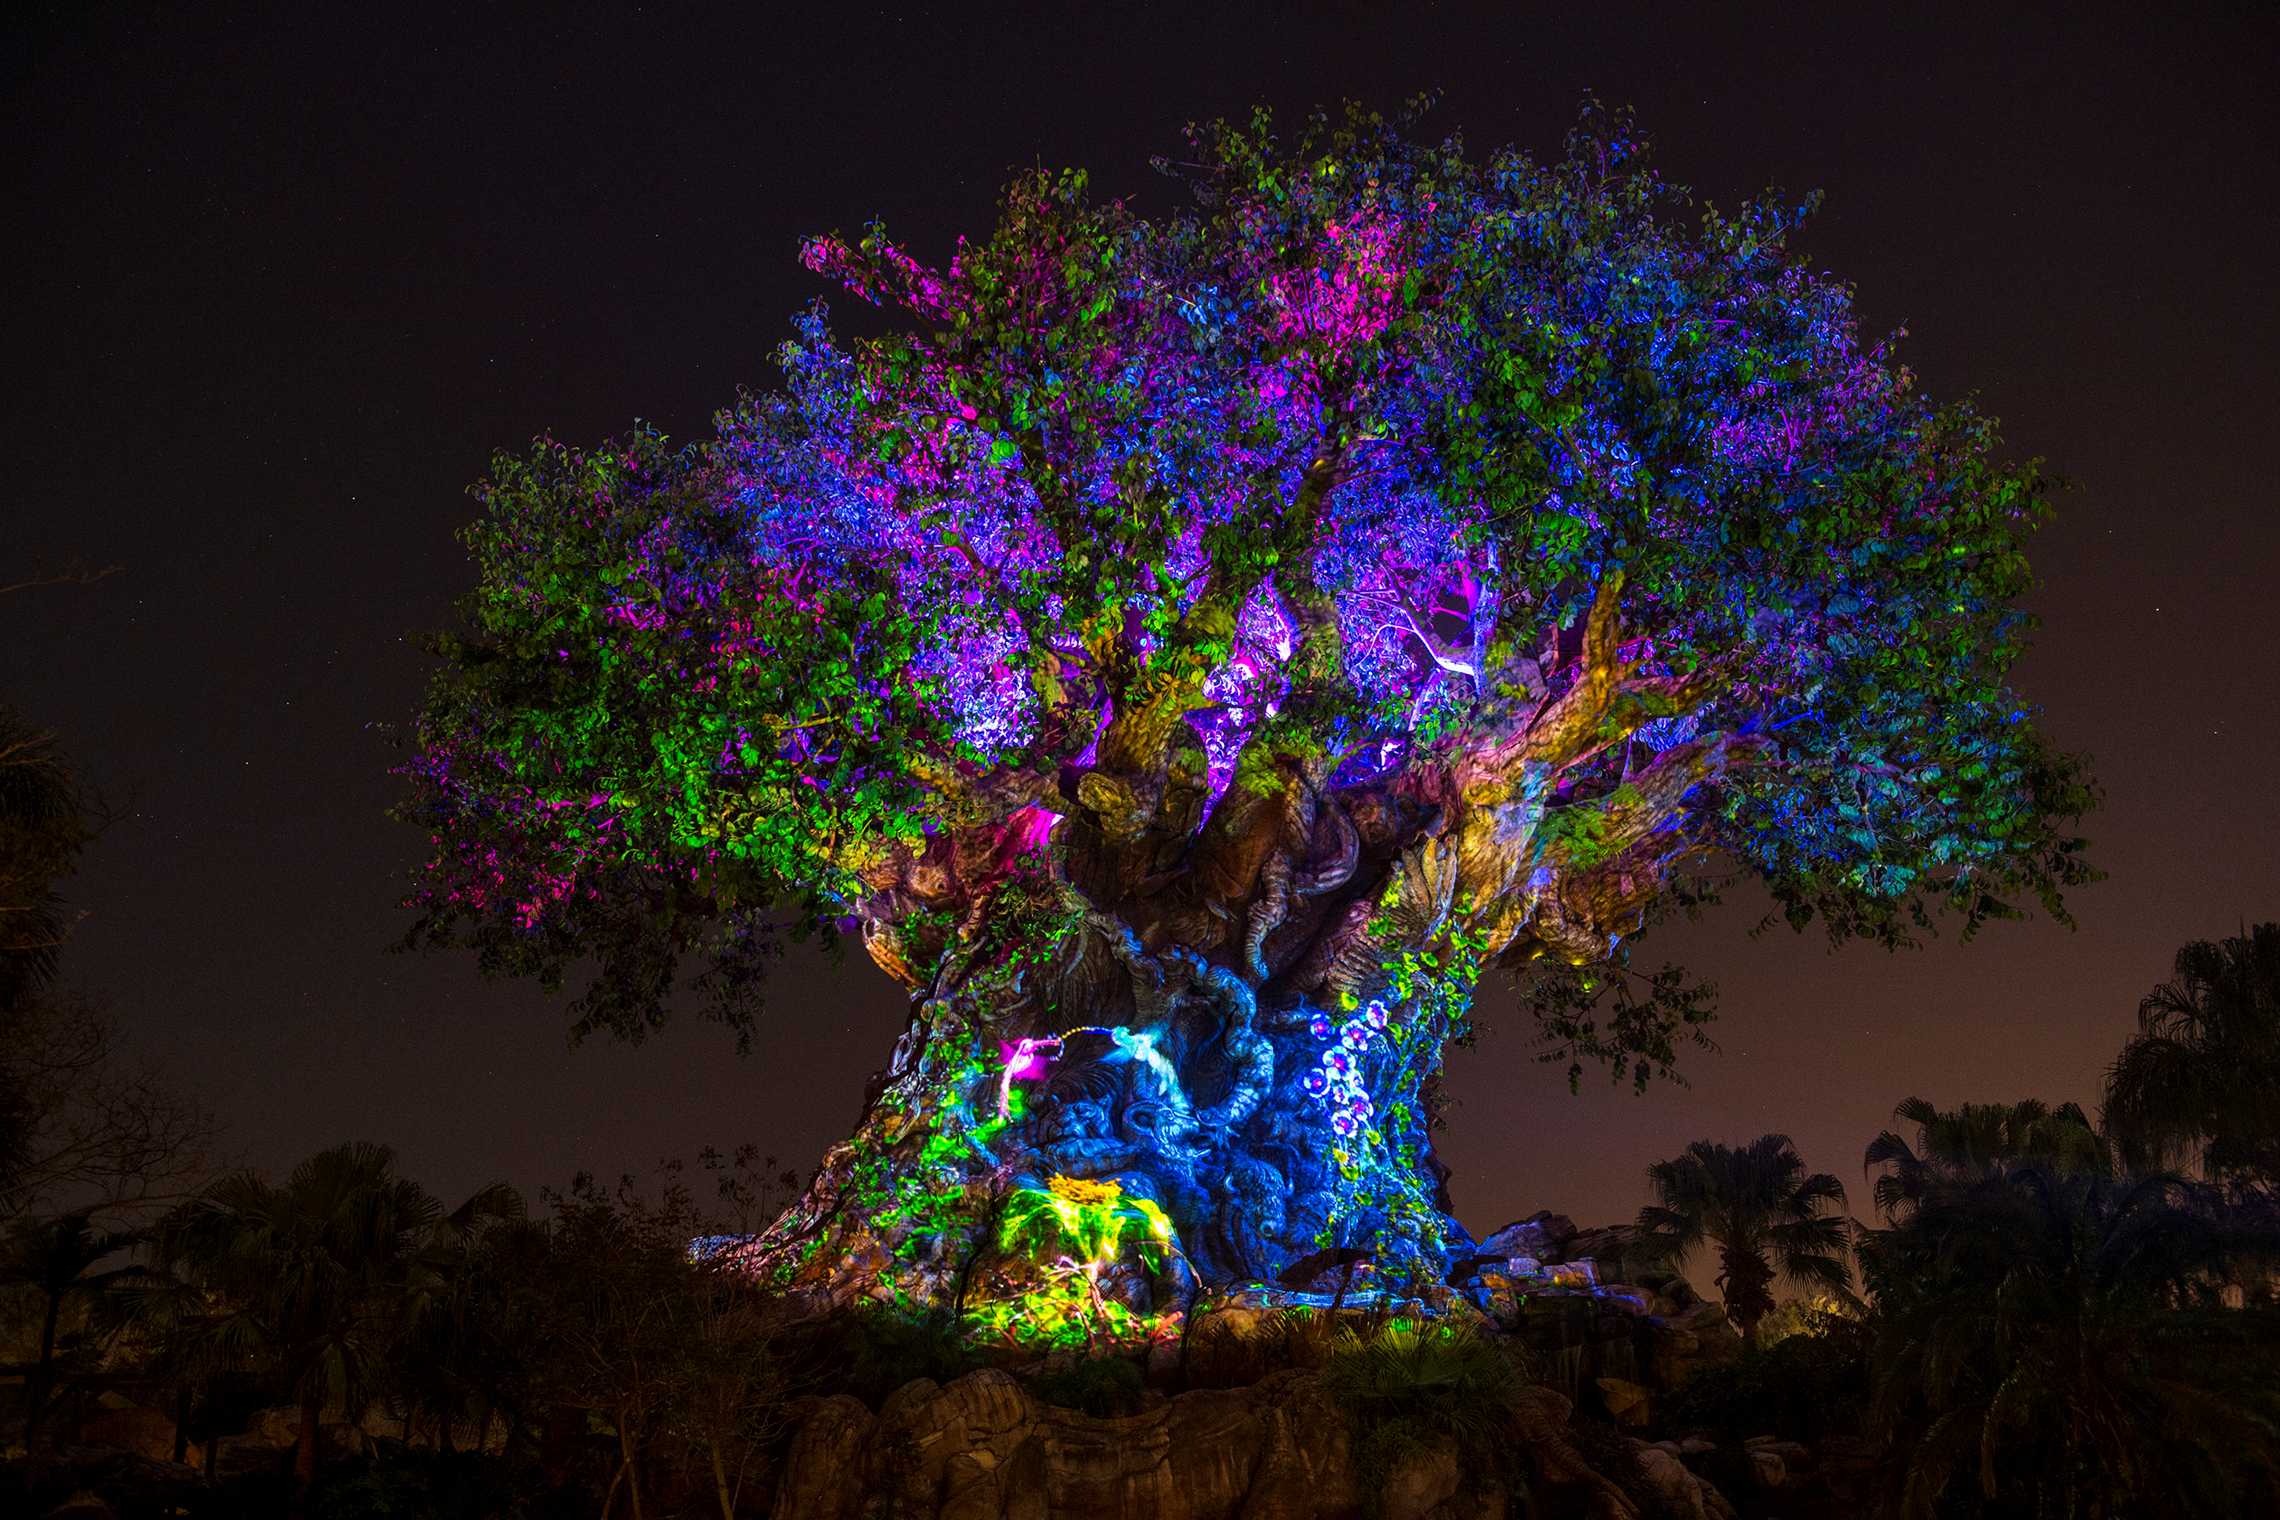 The Tree Of Life #8